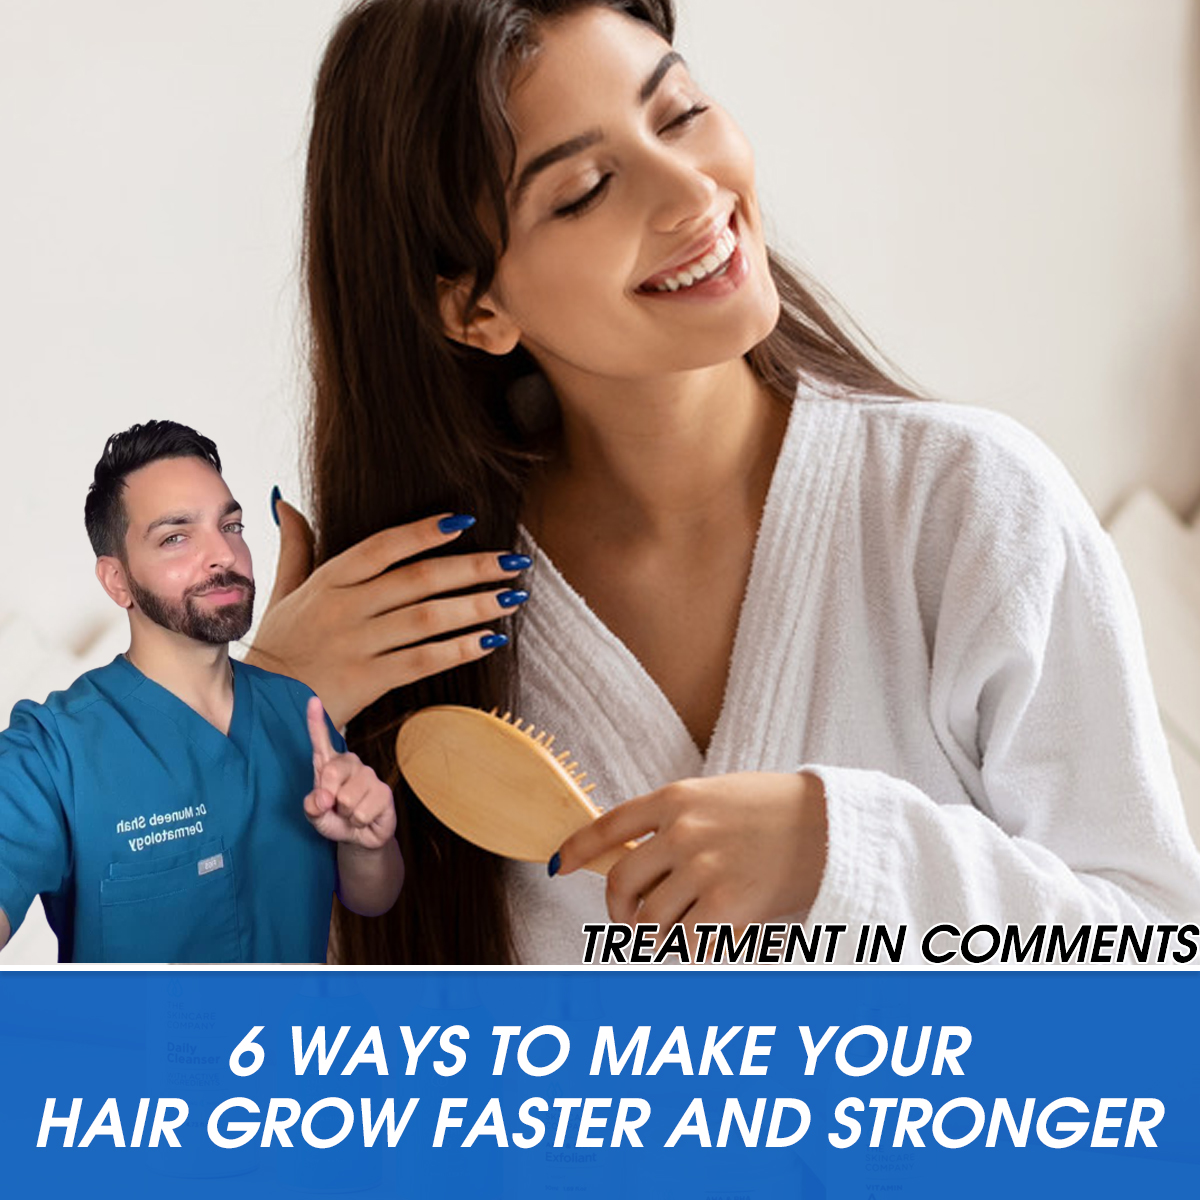 6 Ways to Make Your Hair Grow Faster and Stronger